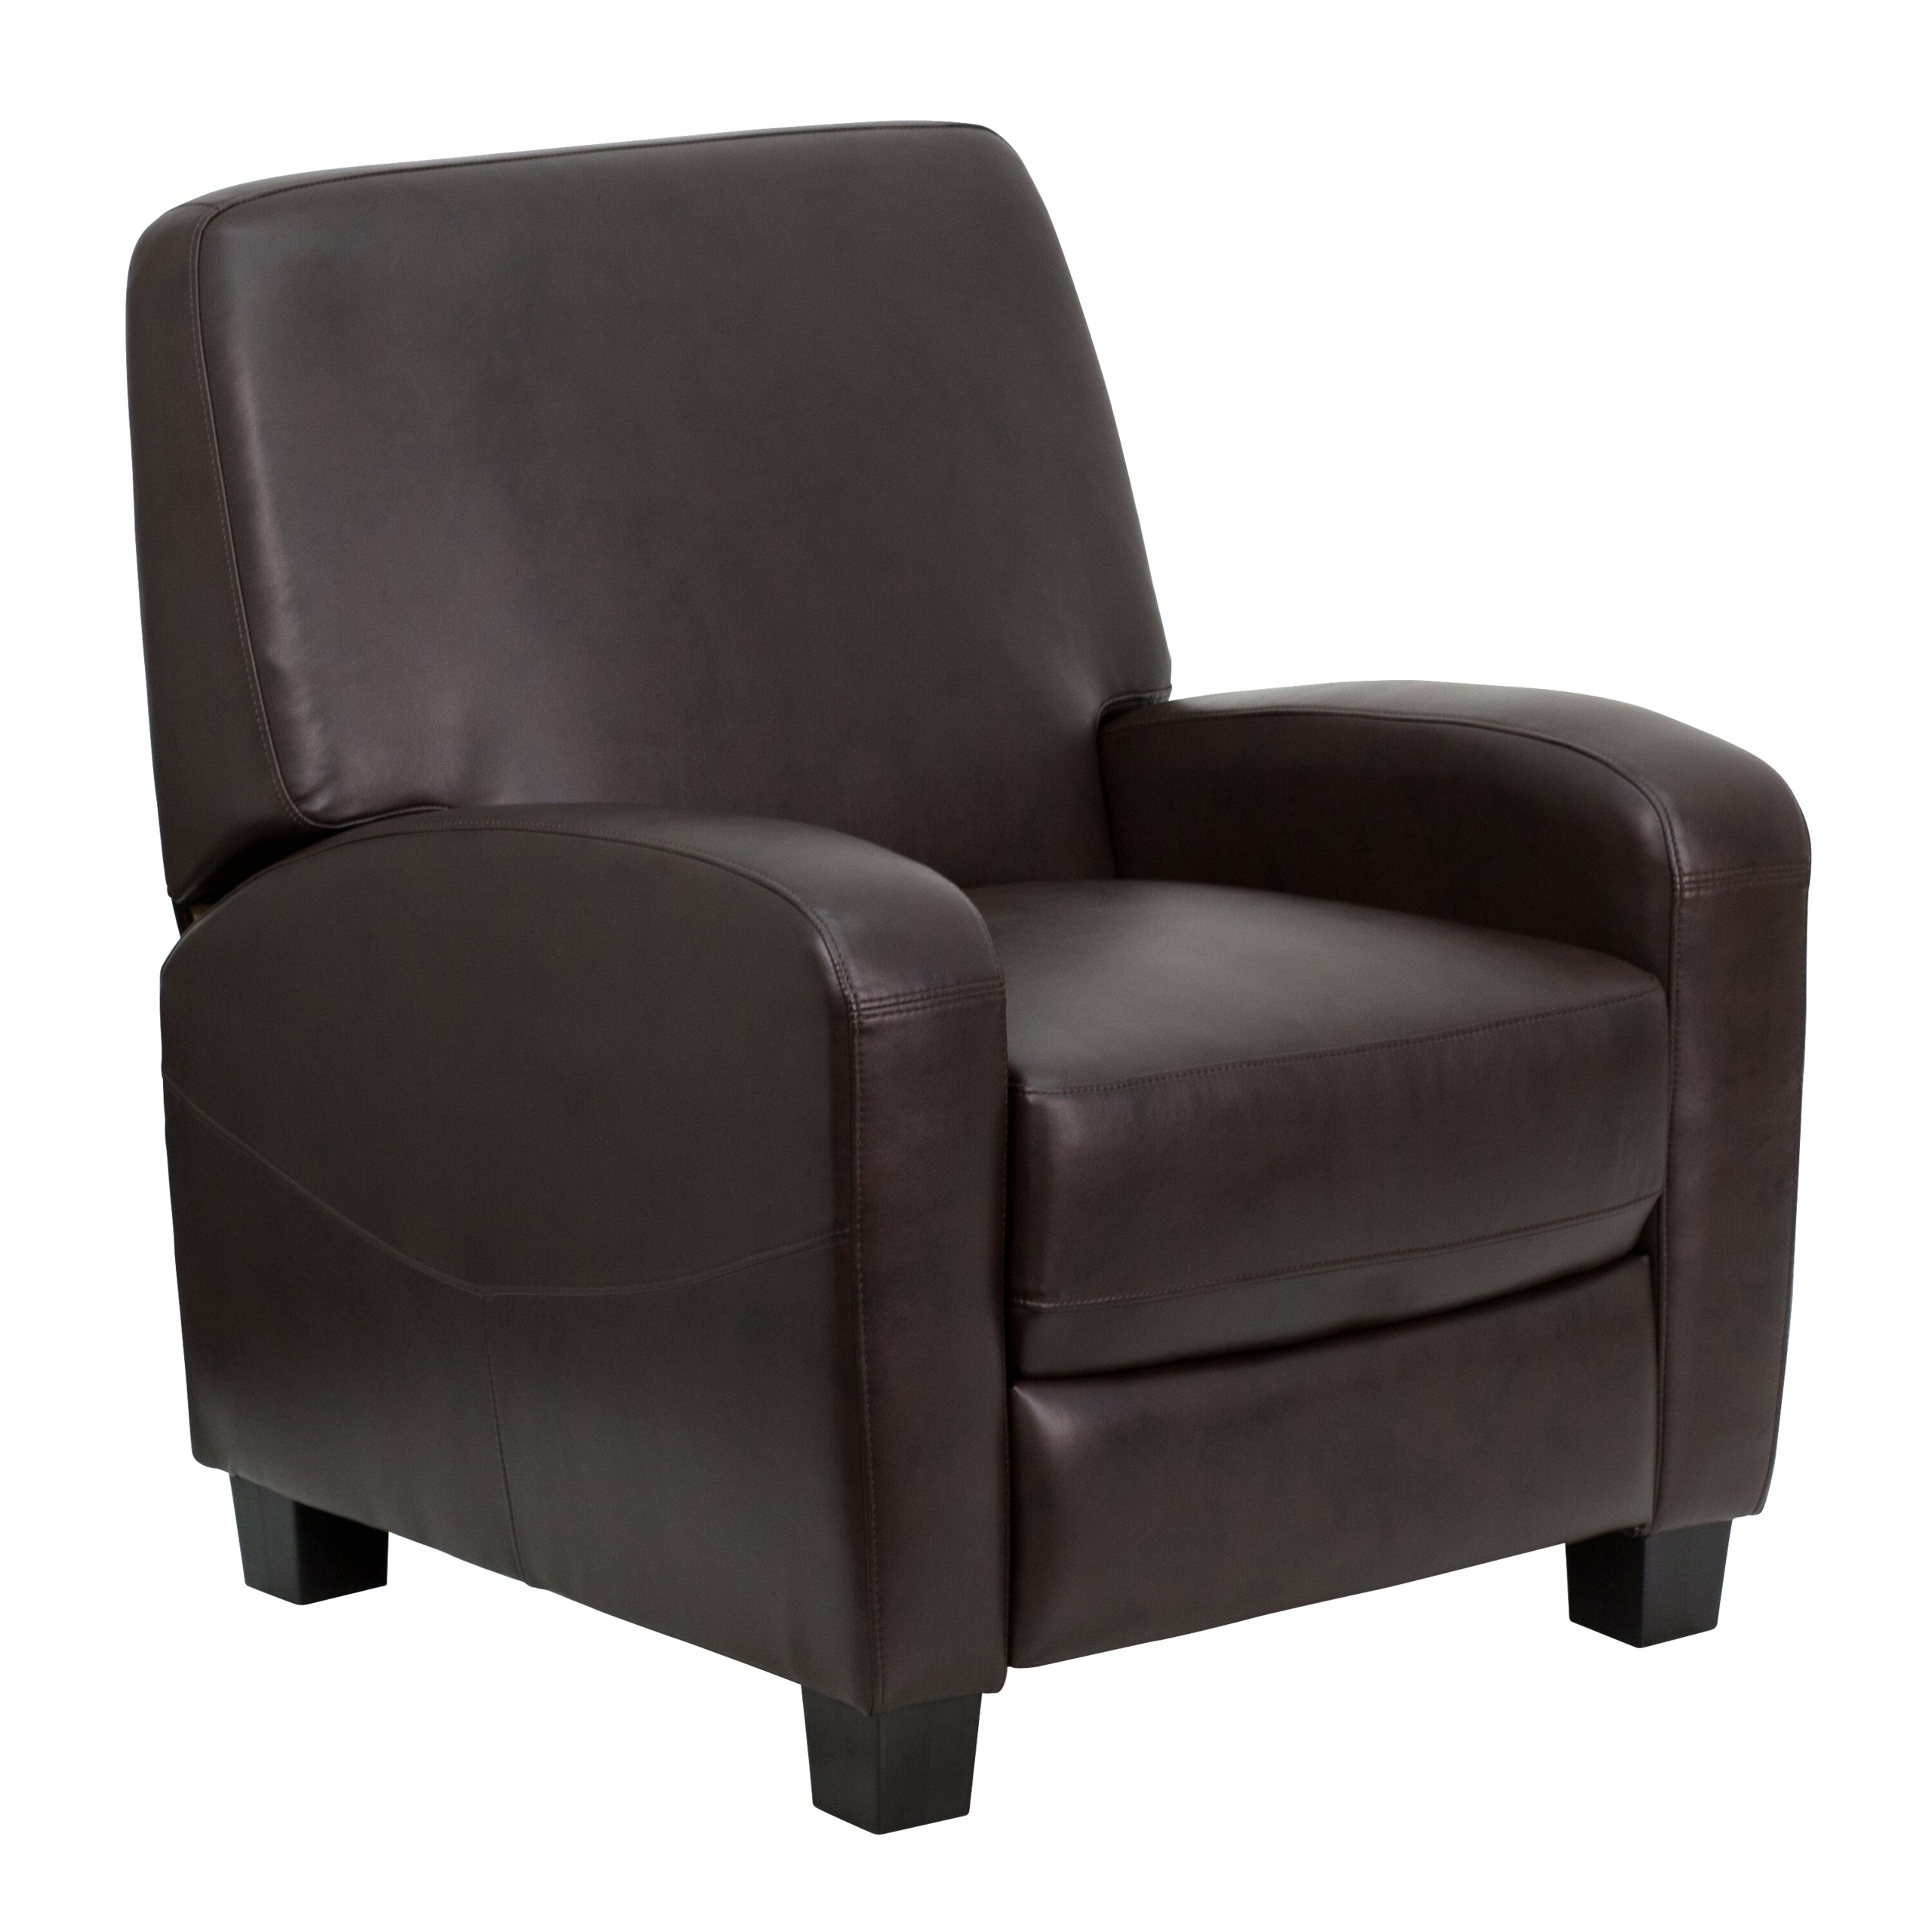 Low back recliners 22